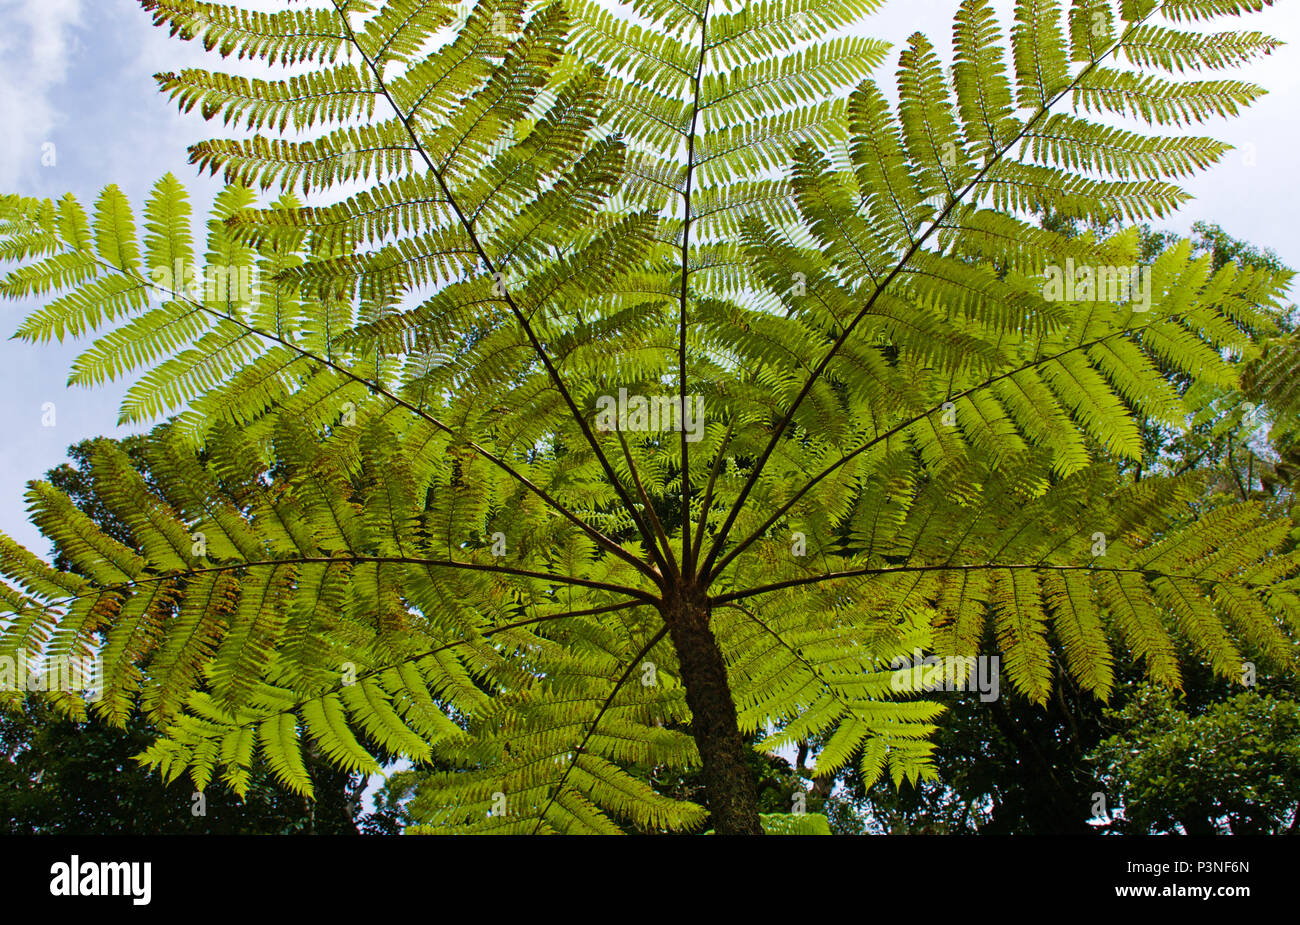 Cyathea cooperi, also known as the Australian tree fern, or Cooper’s tree fern, is a native Tree fern , shown from below with sky behind Stock Photo